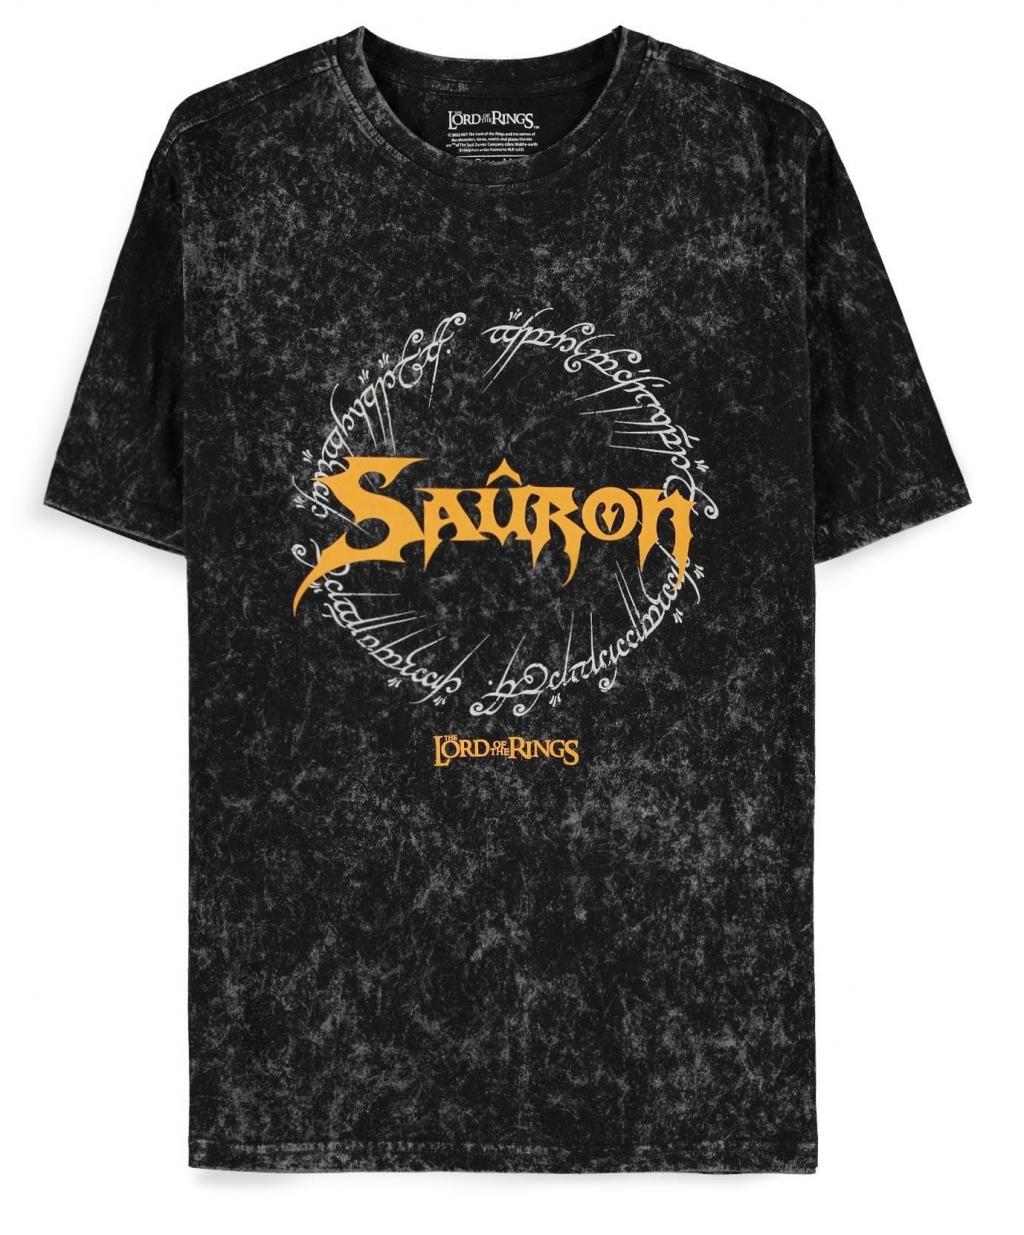 LORD OF THE RINGS - Sauron Round - T-shirt Homme (M)